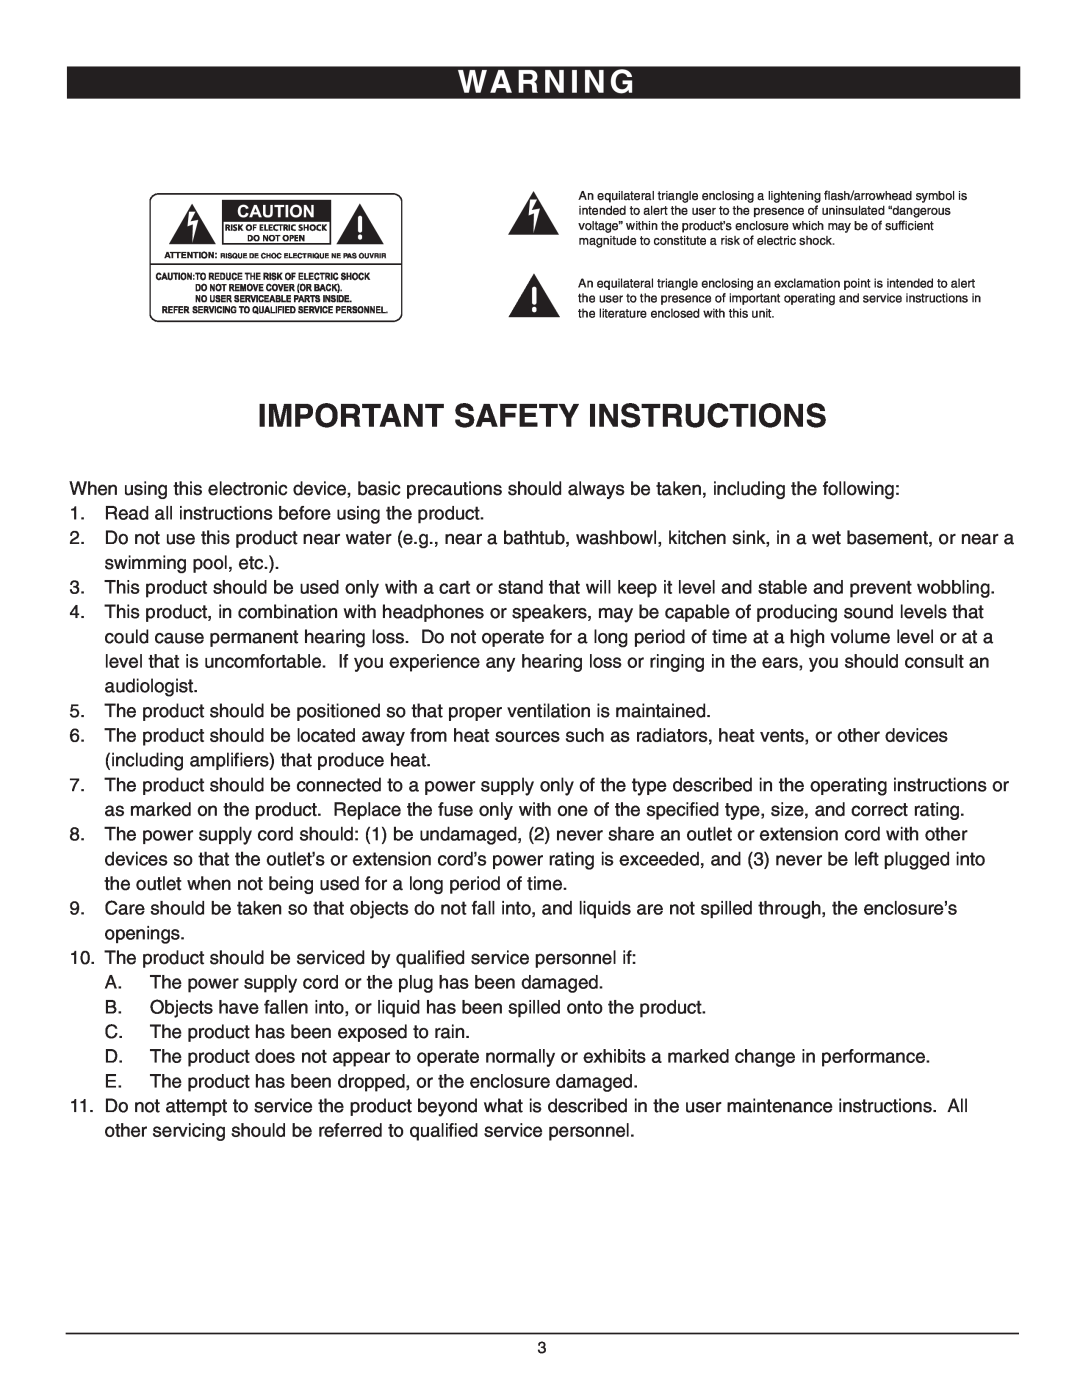 Nady Systems GTA-1260 owner manual Wa R N I N G, Important Safety Instructions 